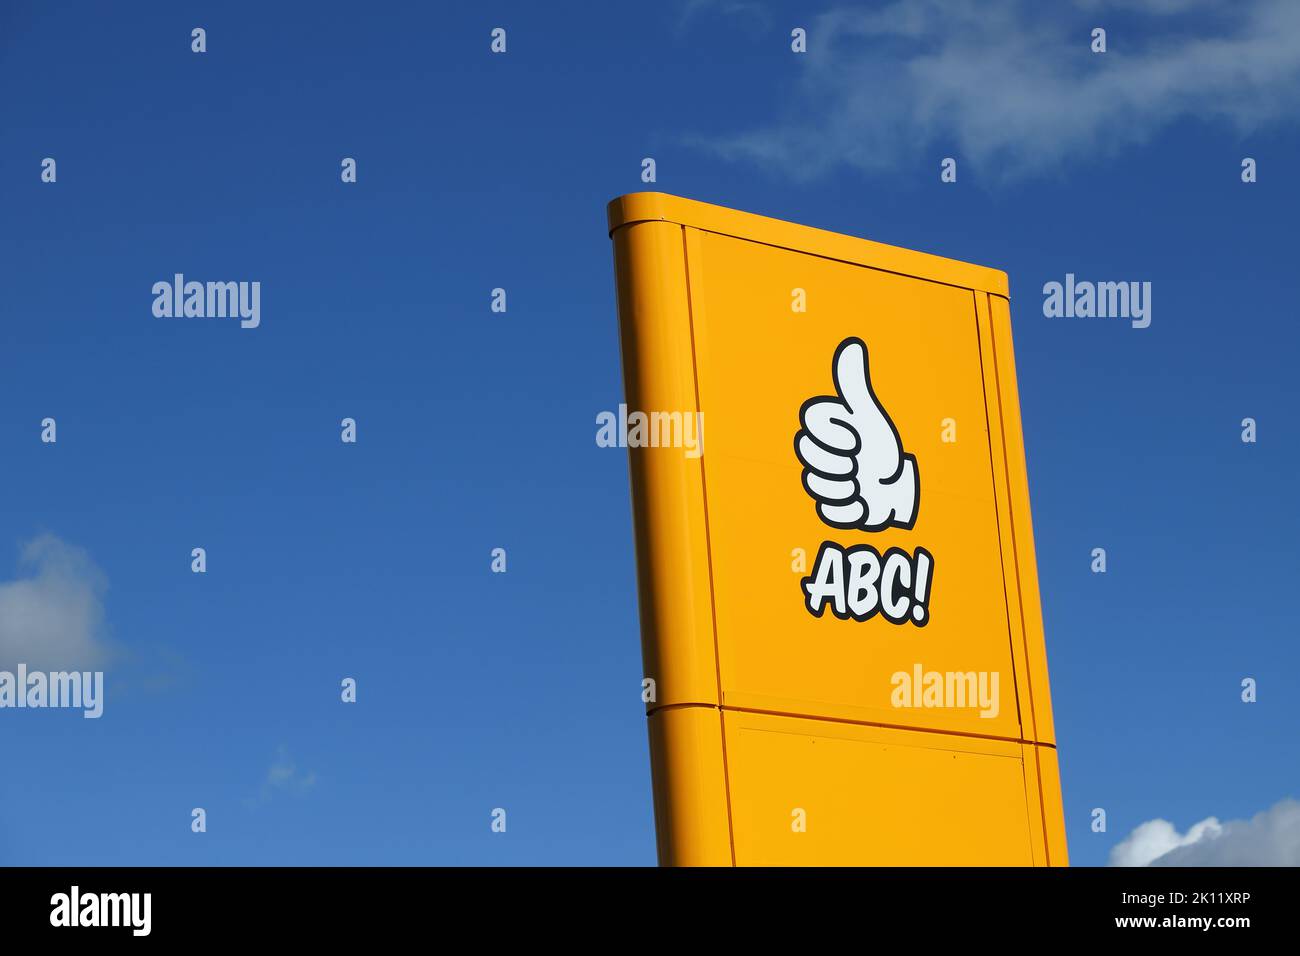 Yliotorni, Finland - August 29, 2022: The Abc gasoline station brand sign. Stock Photo